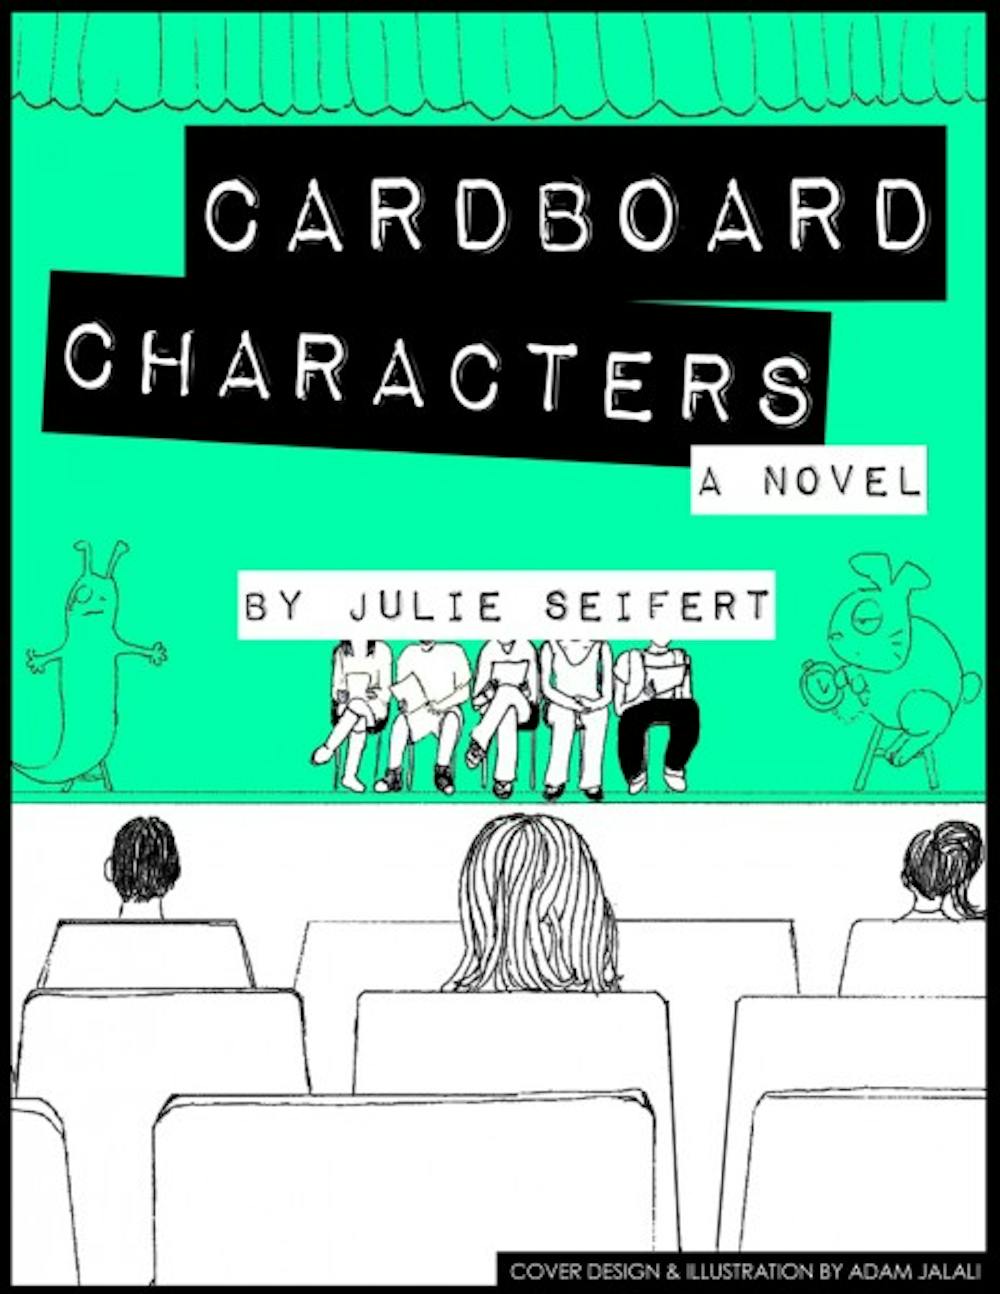 <p>“Cardboard Characters” took nearly three years to write, but it was worth it for author Julie Seifert.</p>